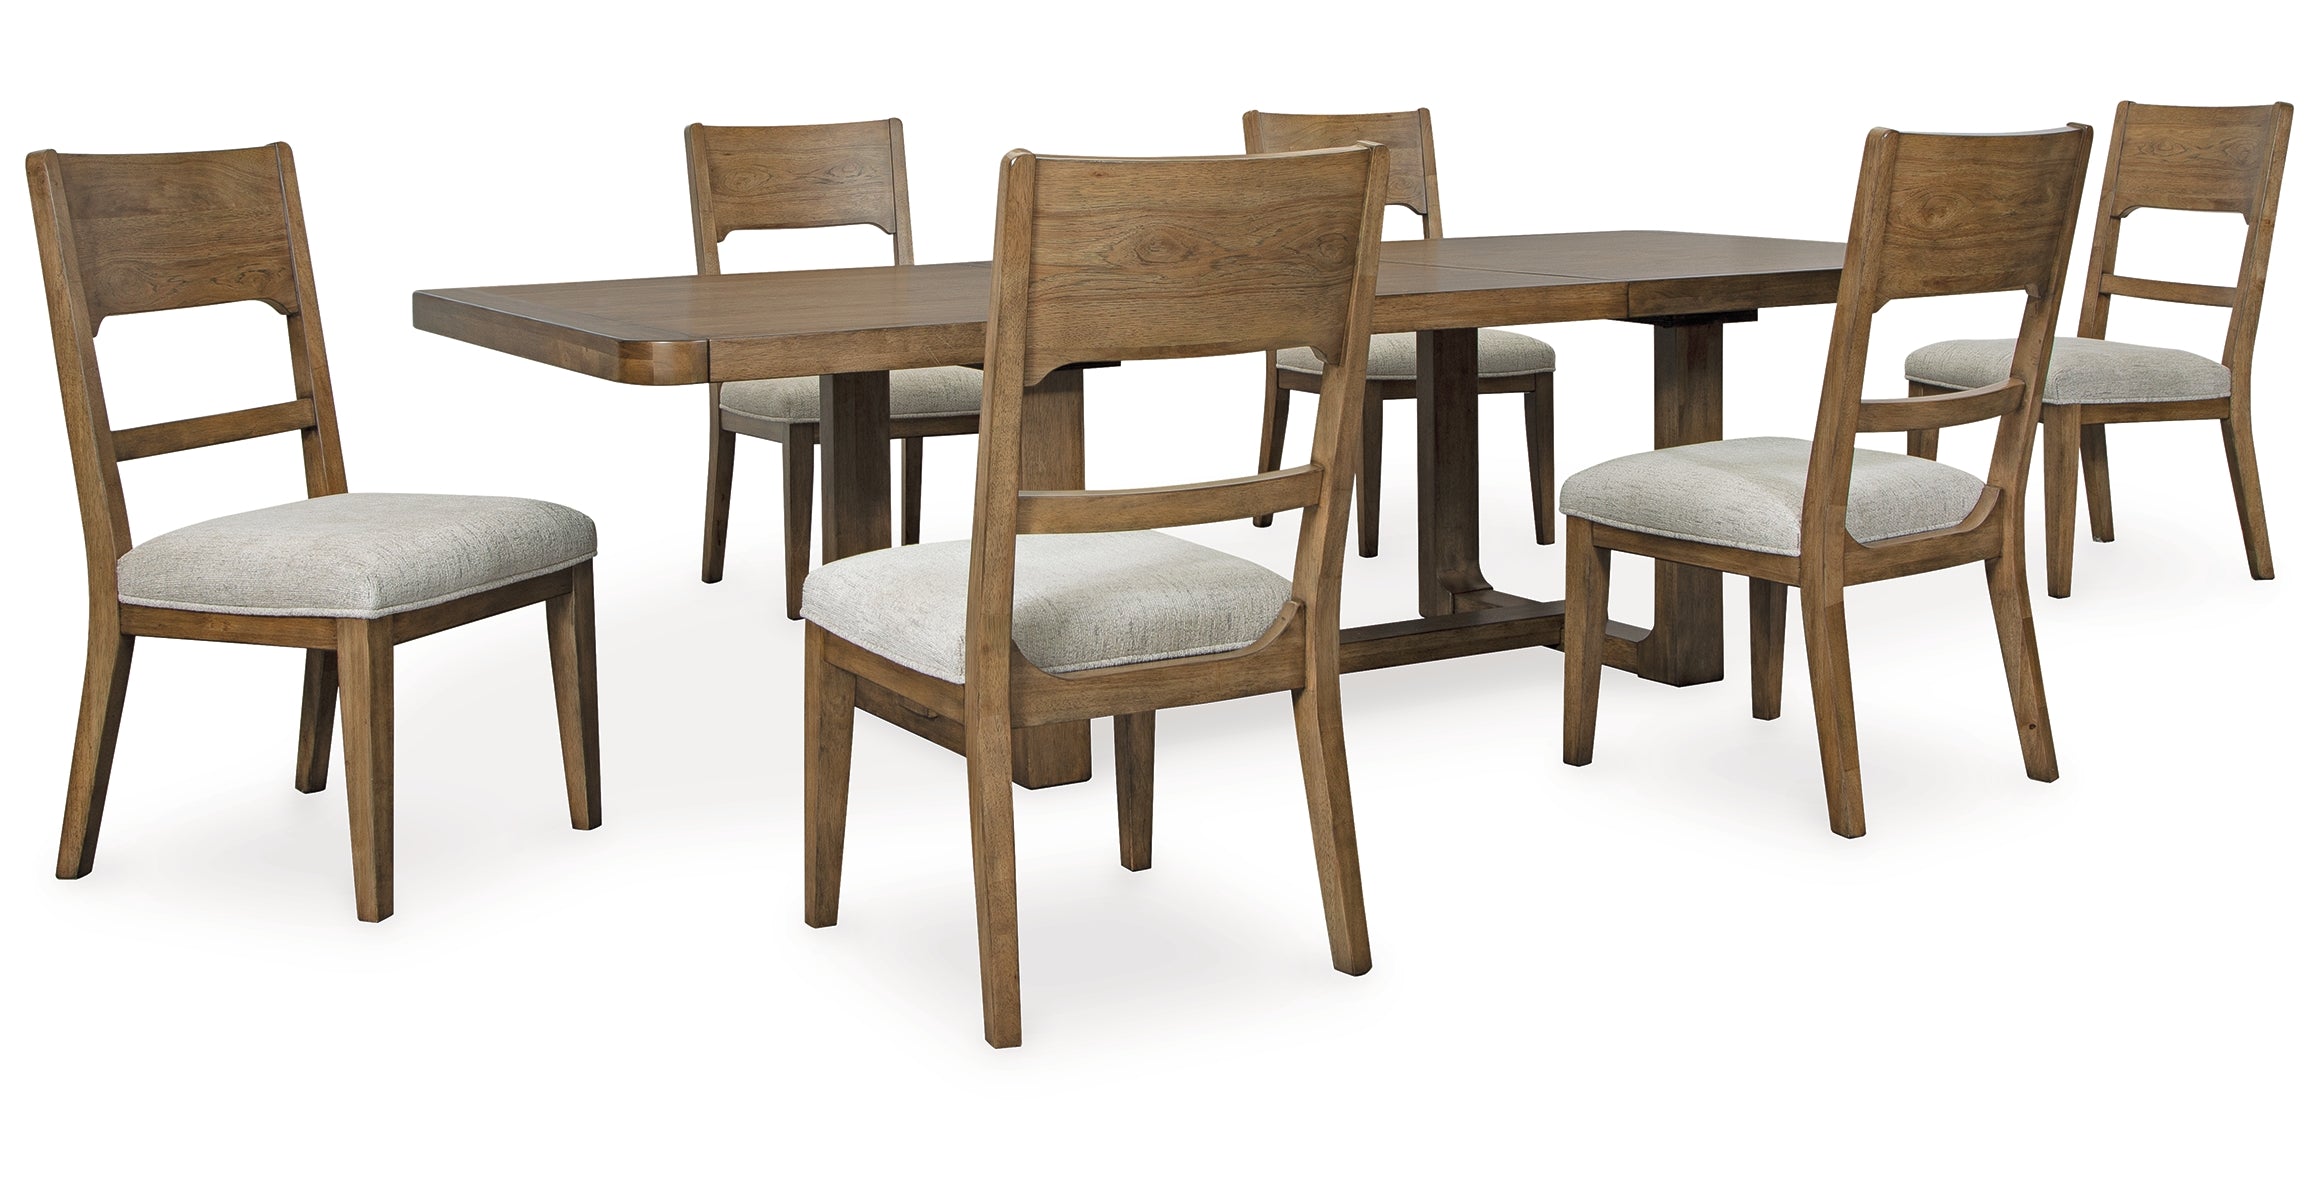 Cabalynn Dining Table and 6 Chairs